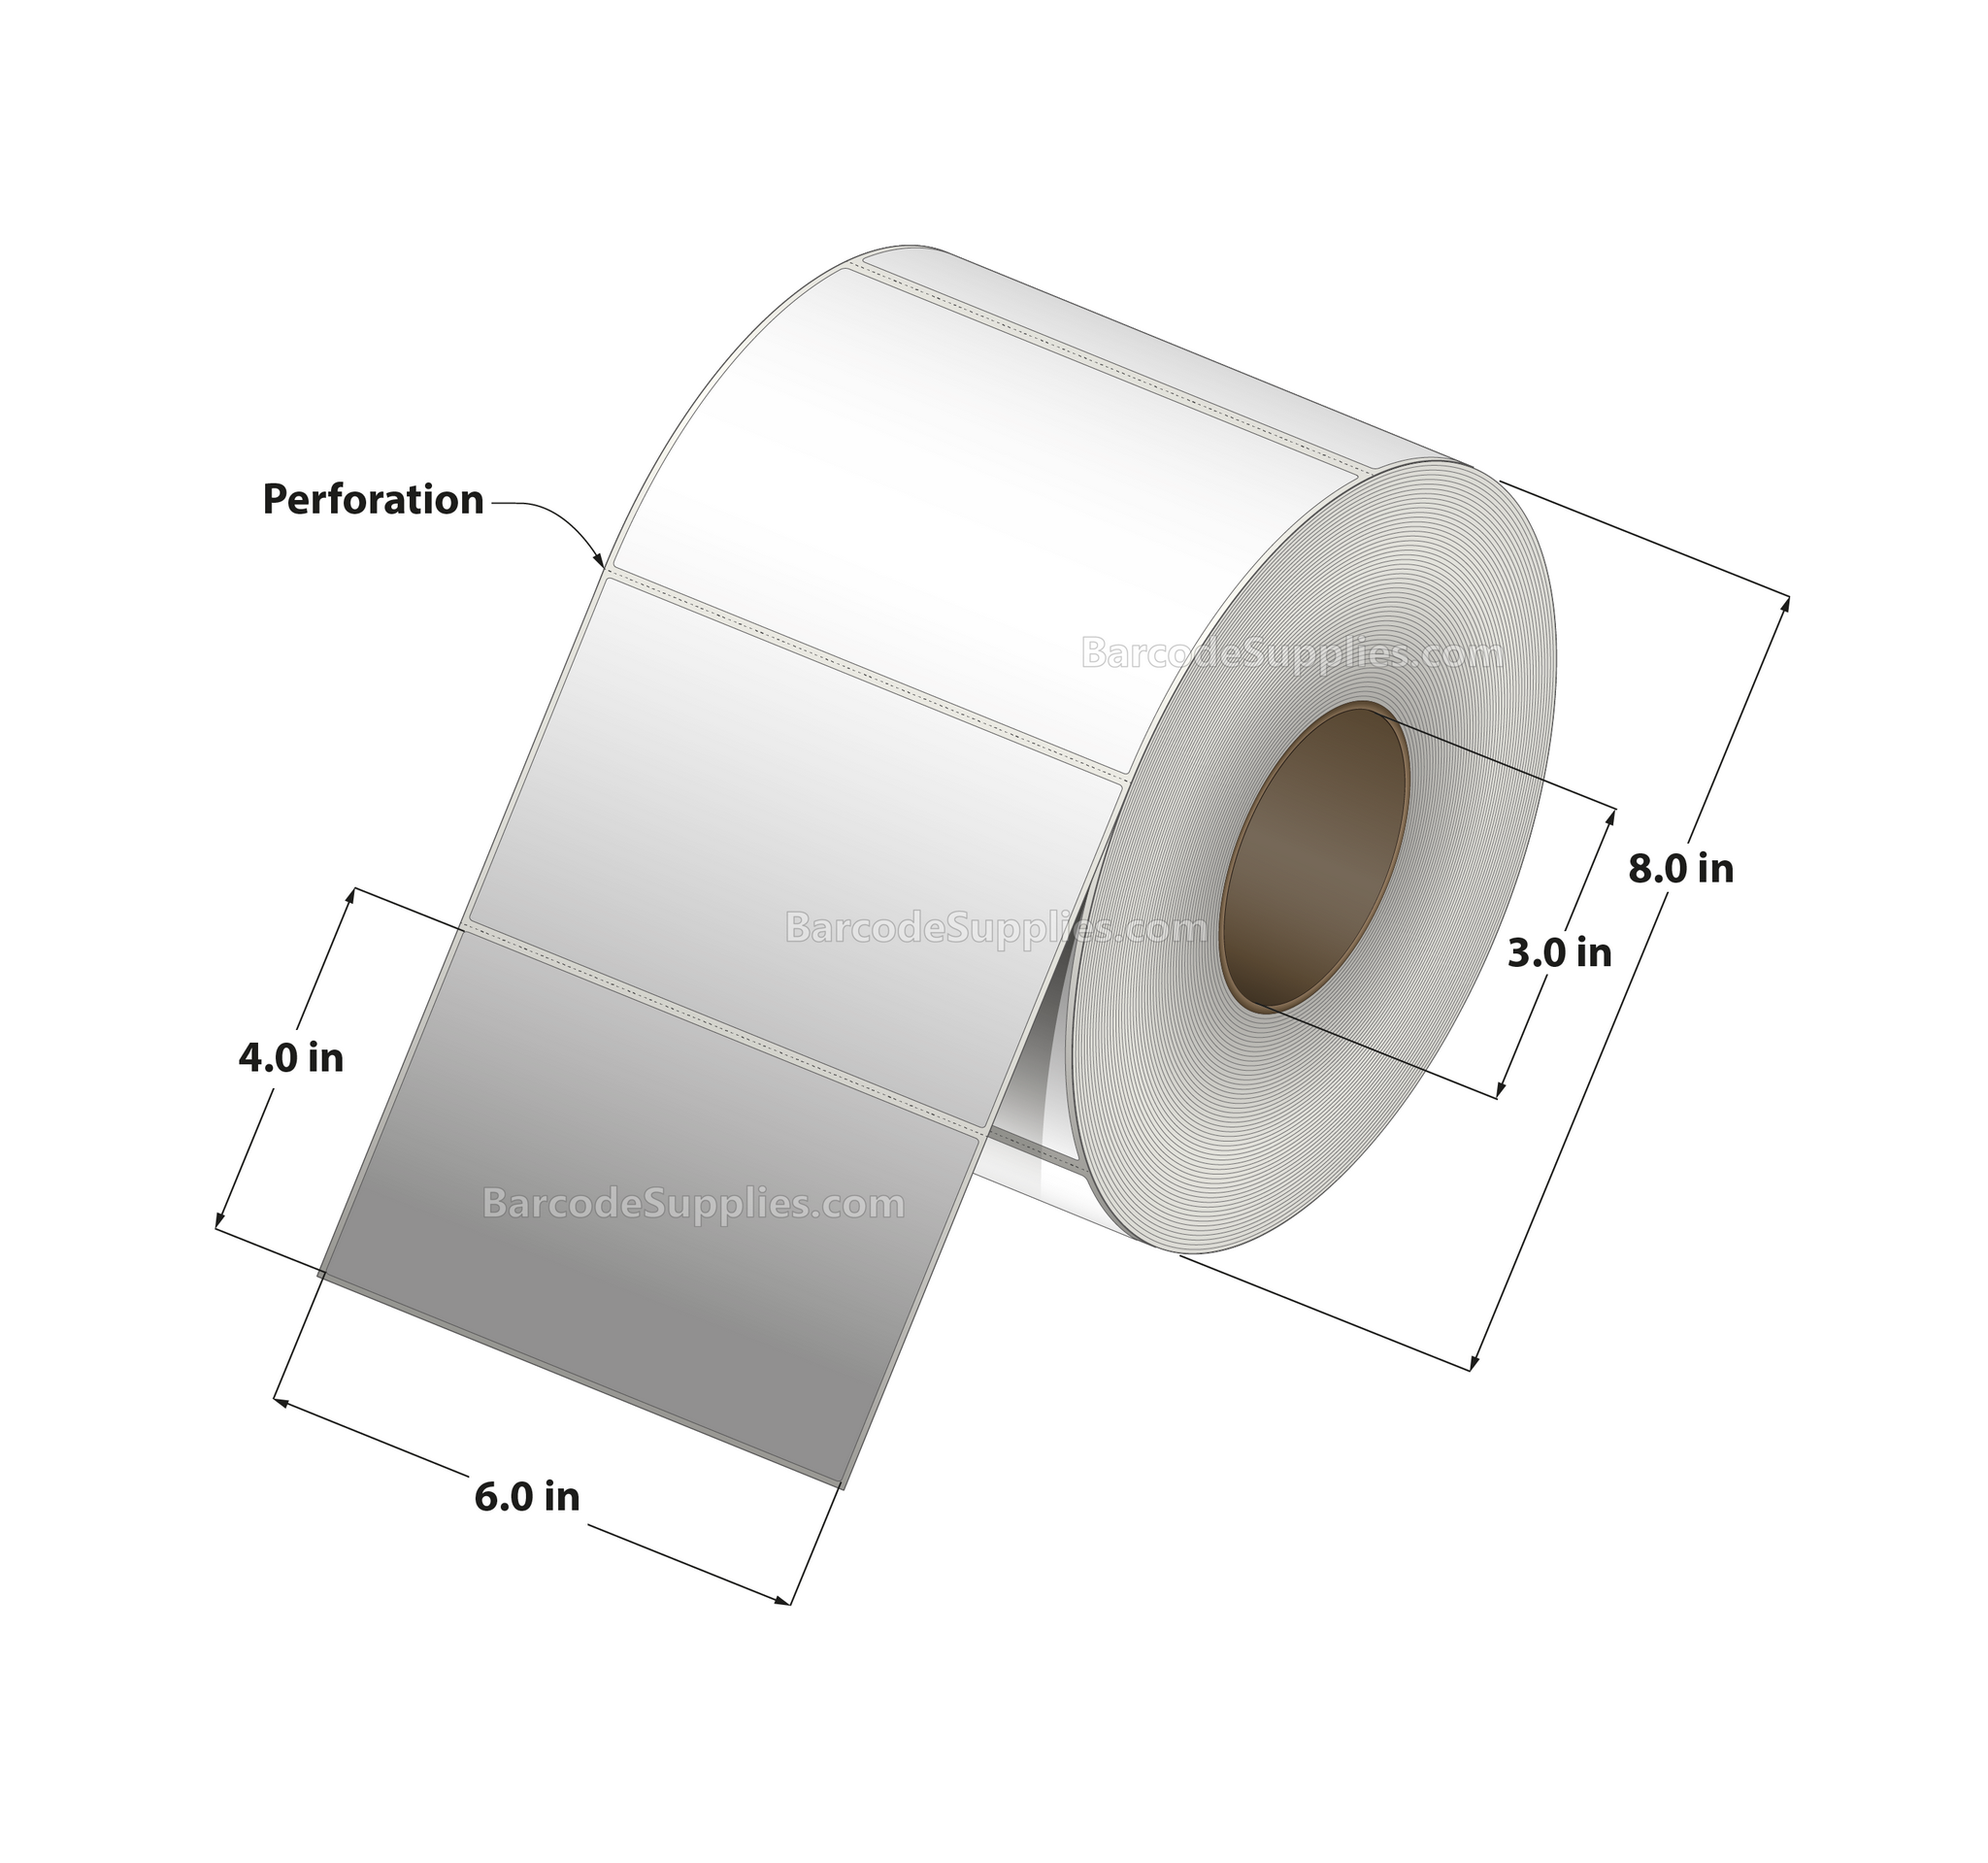 6 x 4 Thermal Transfer White Labels With Rubber Adhesive - Perforated - 1500 Labels Per Roll - Carton Of 4 Rolls - 6000 Labels Total - MPN: CTT600400-3P